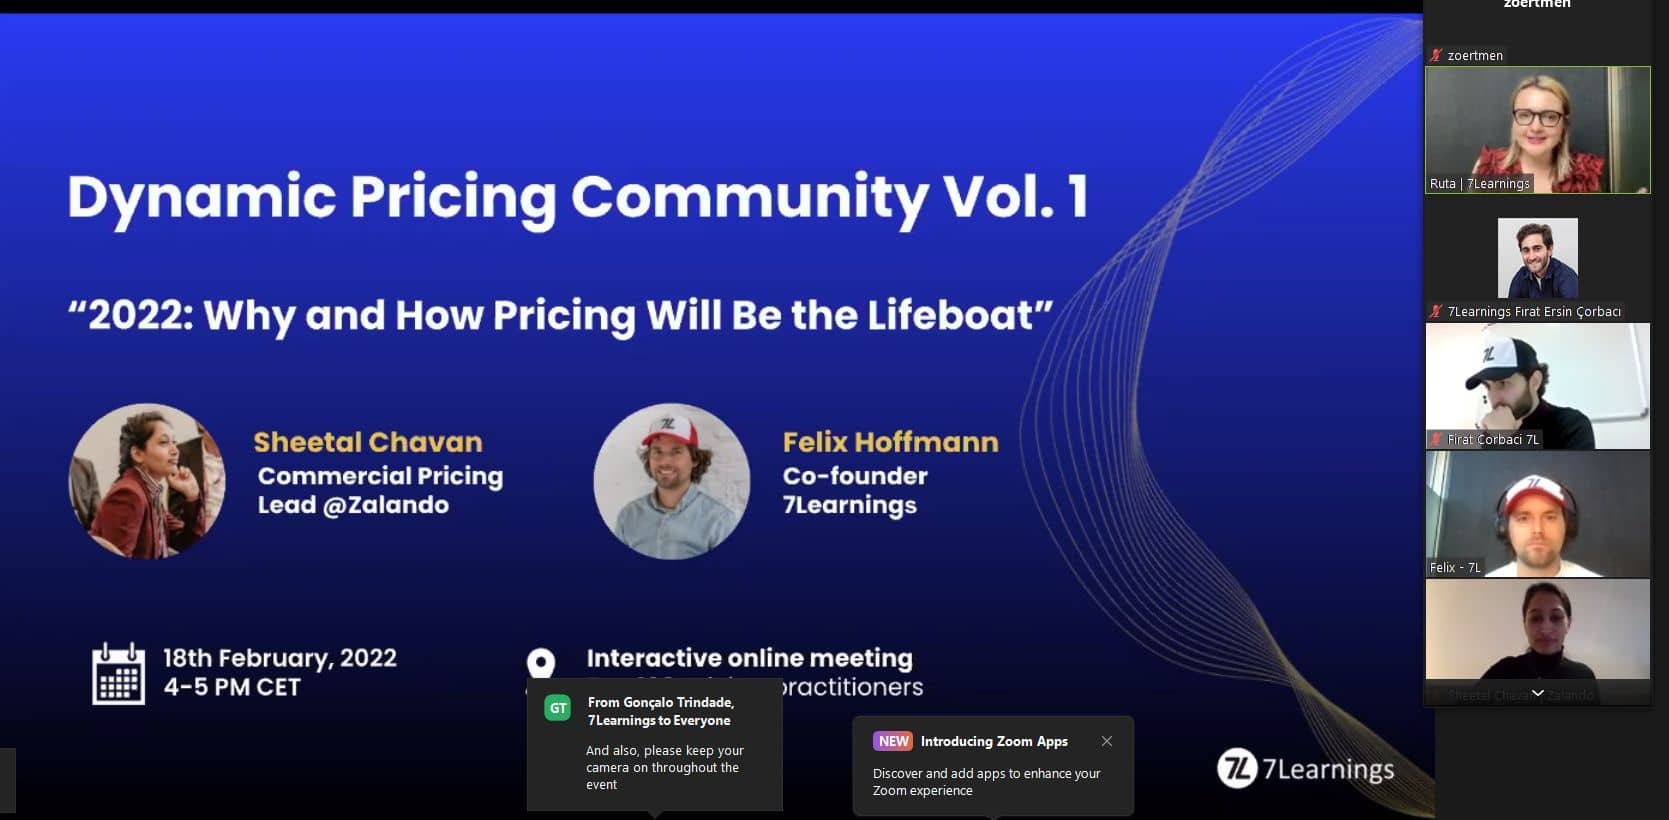 Dynamic Pricing Community first event